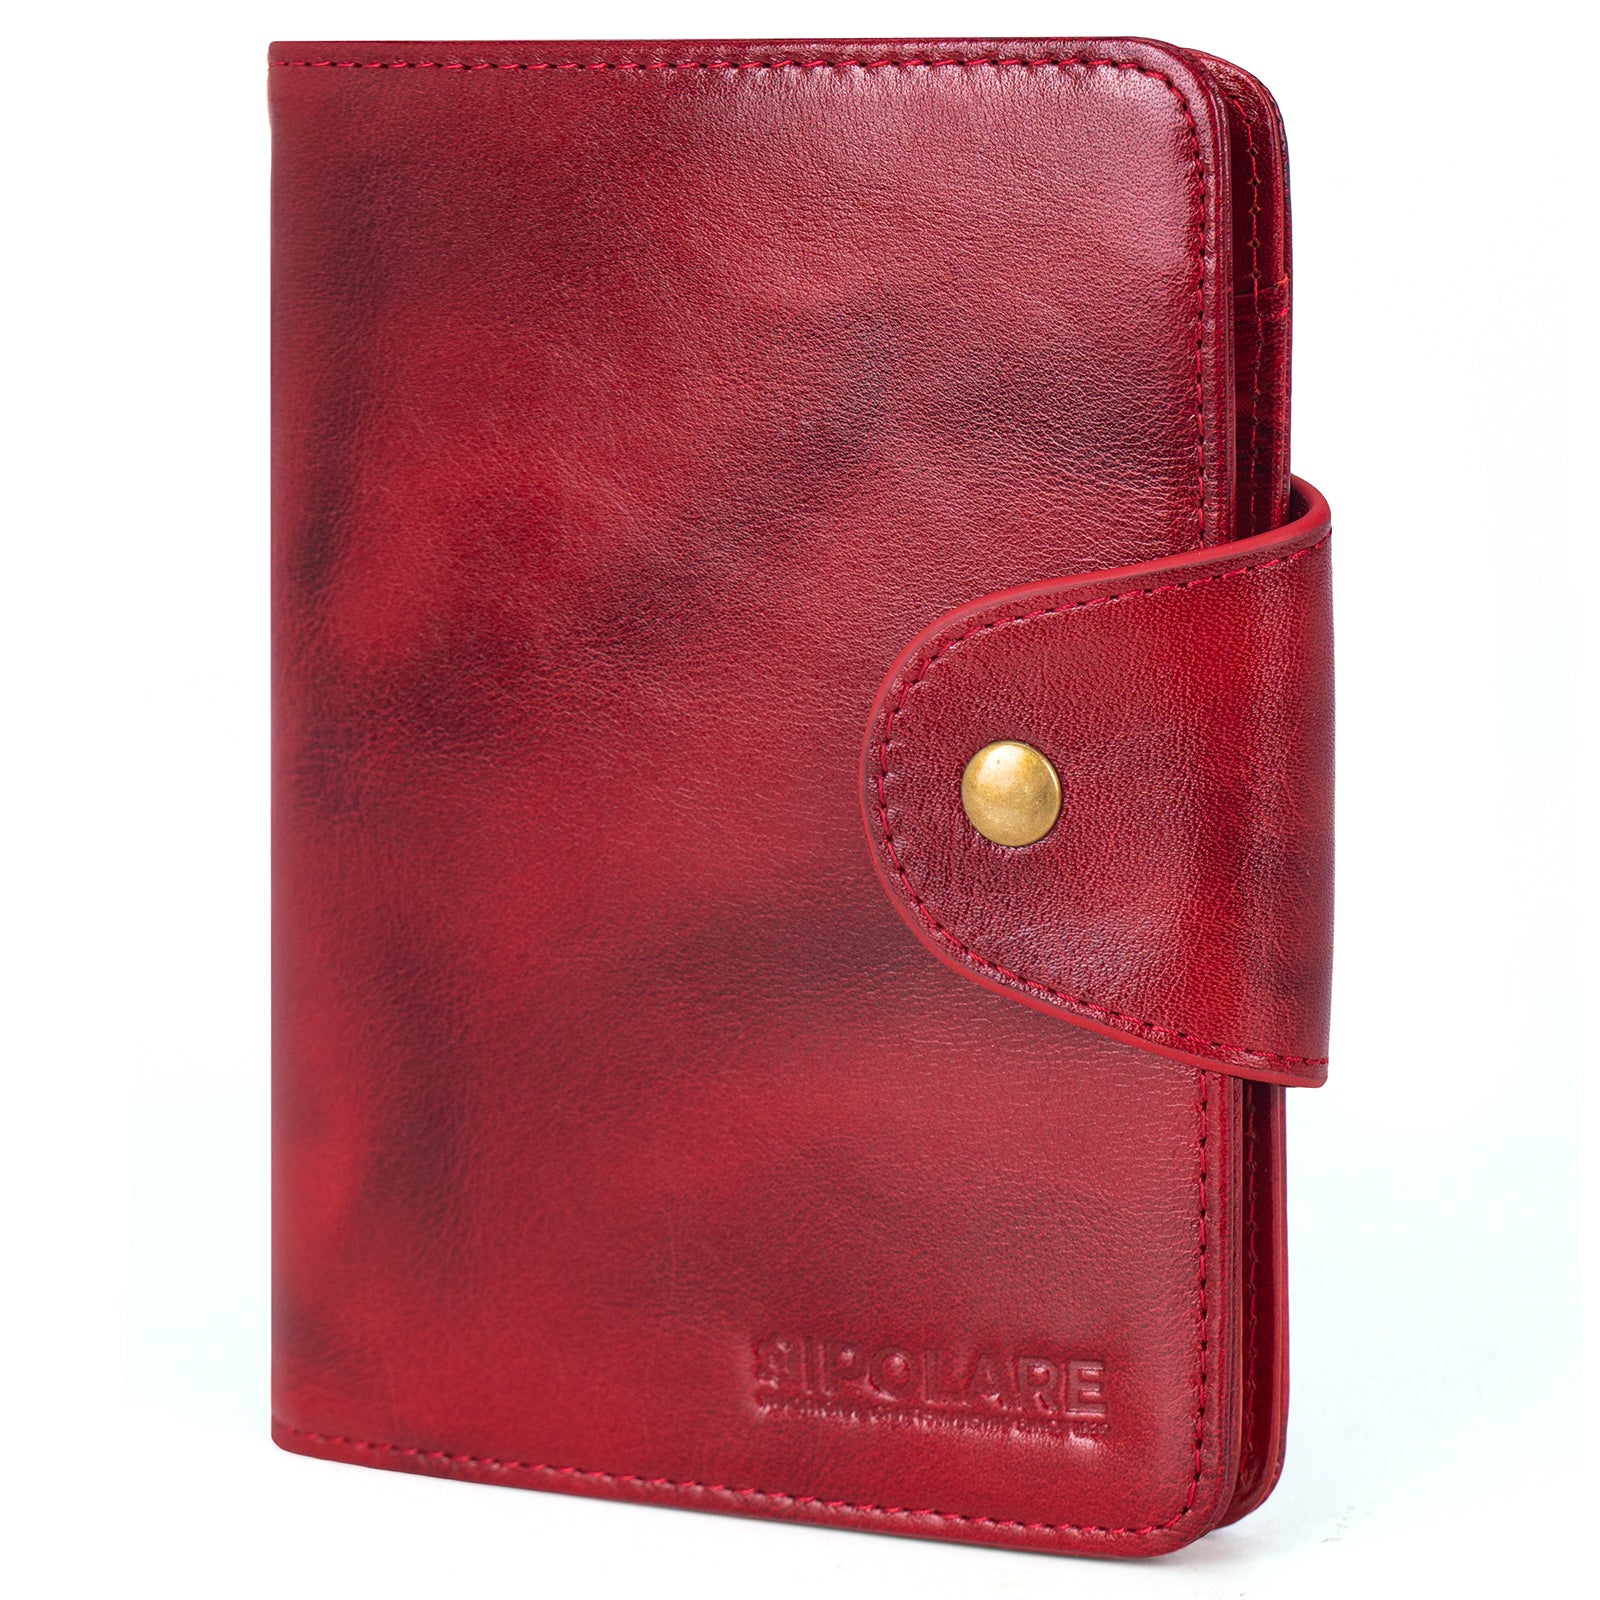 Polare Full Grain Leather Slim and Soft RFID Blocking Passport Wallet (Red)